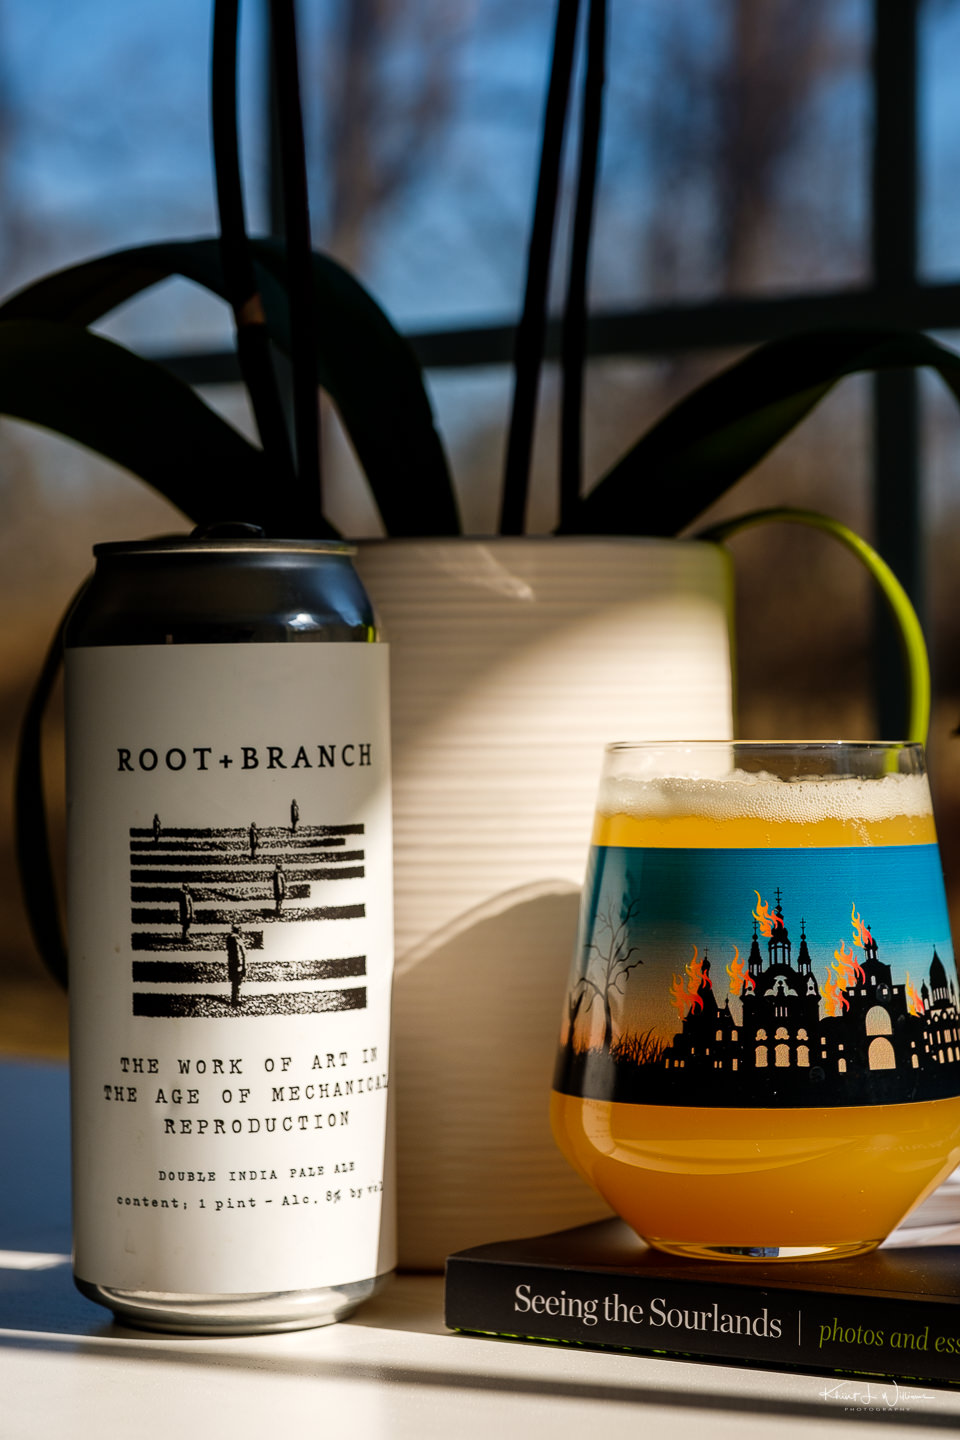 Drank "The Work of Art in the Age of Mechanical Reproduction" by Roots+Branch